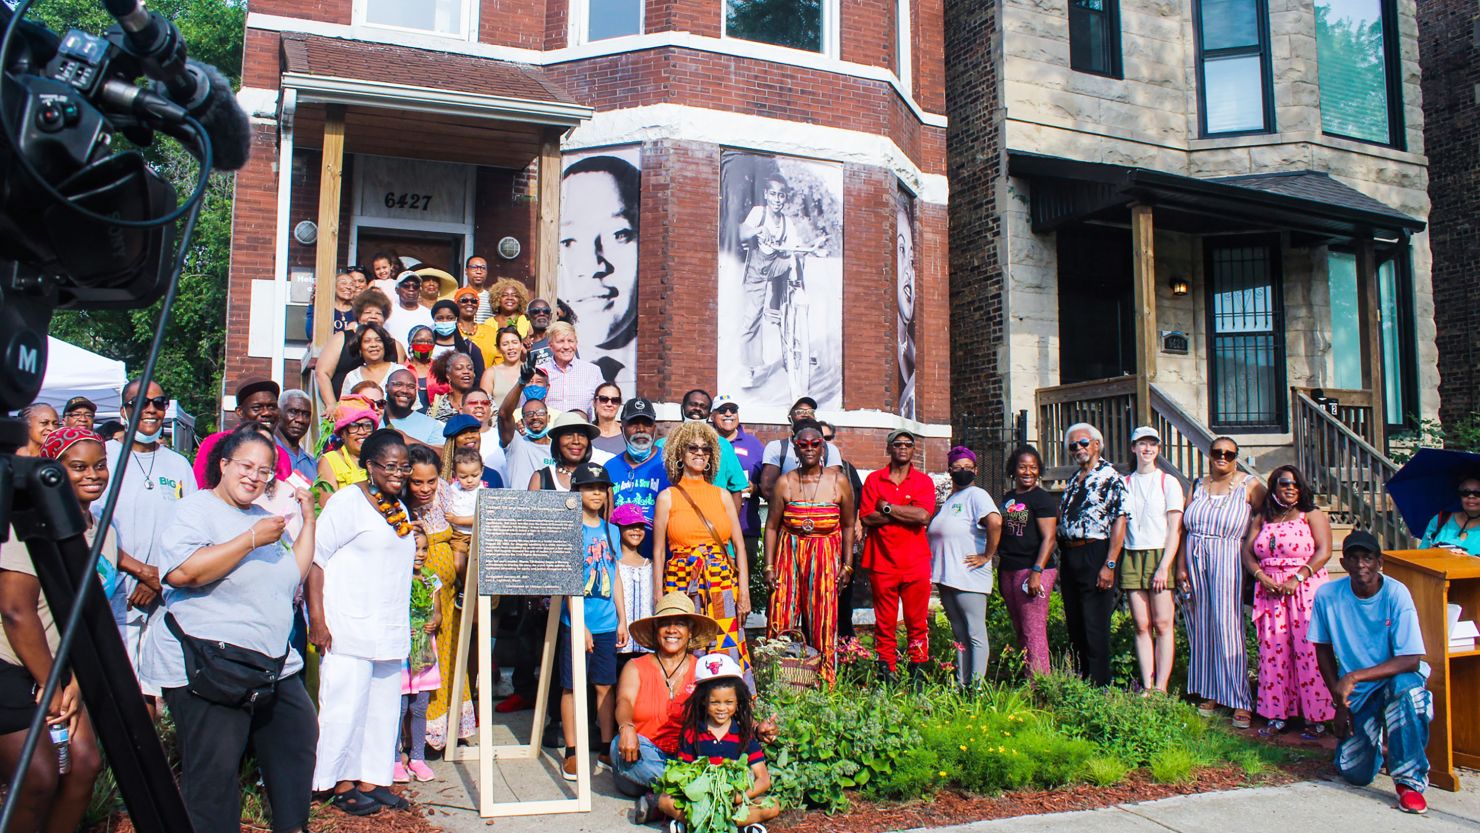 People gather outside Emmett Till's house in Chicago on what would have been his 80th birthday on July 25, 2021.